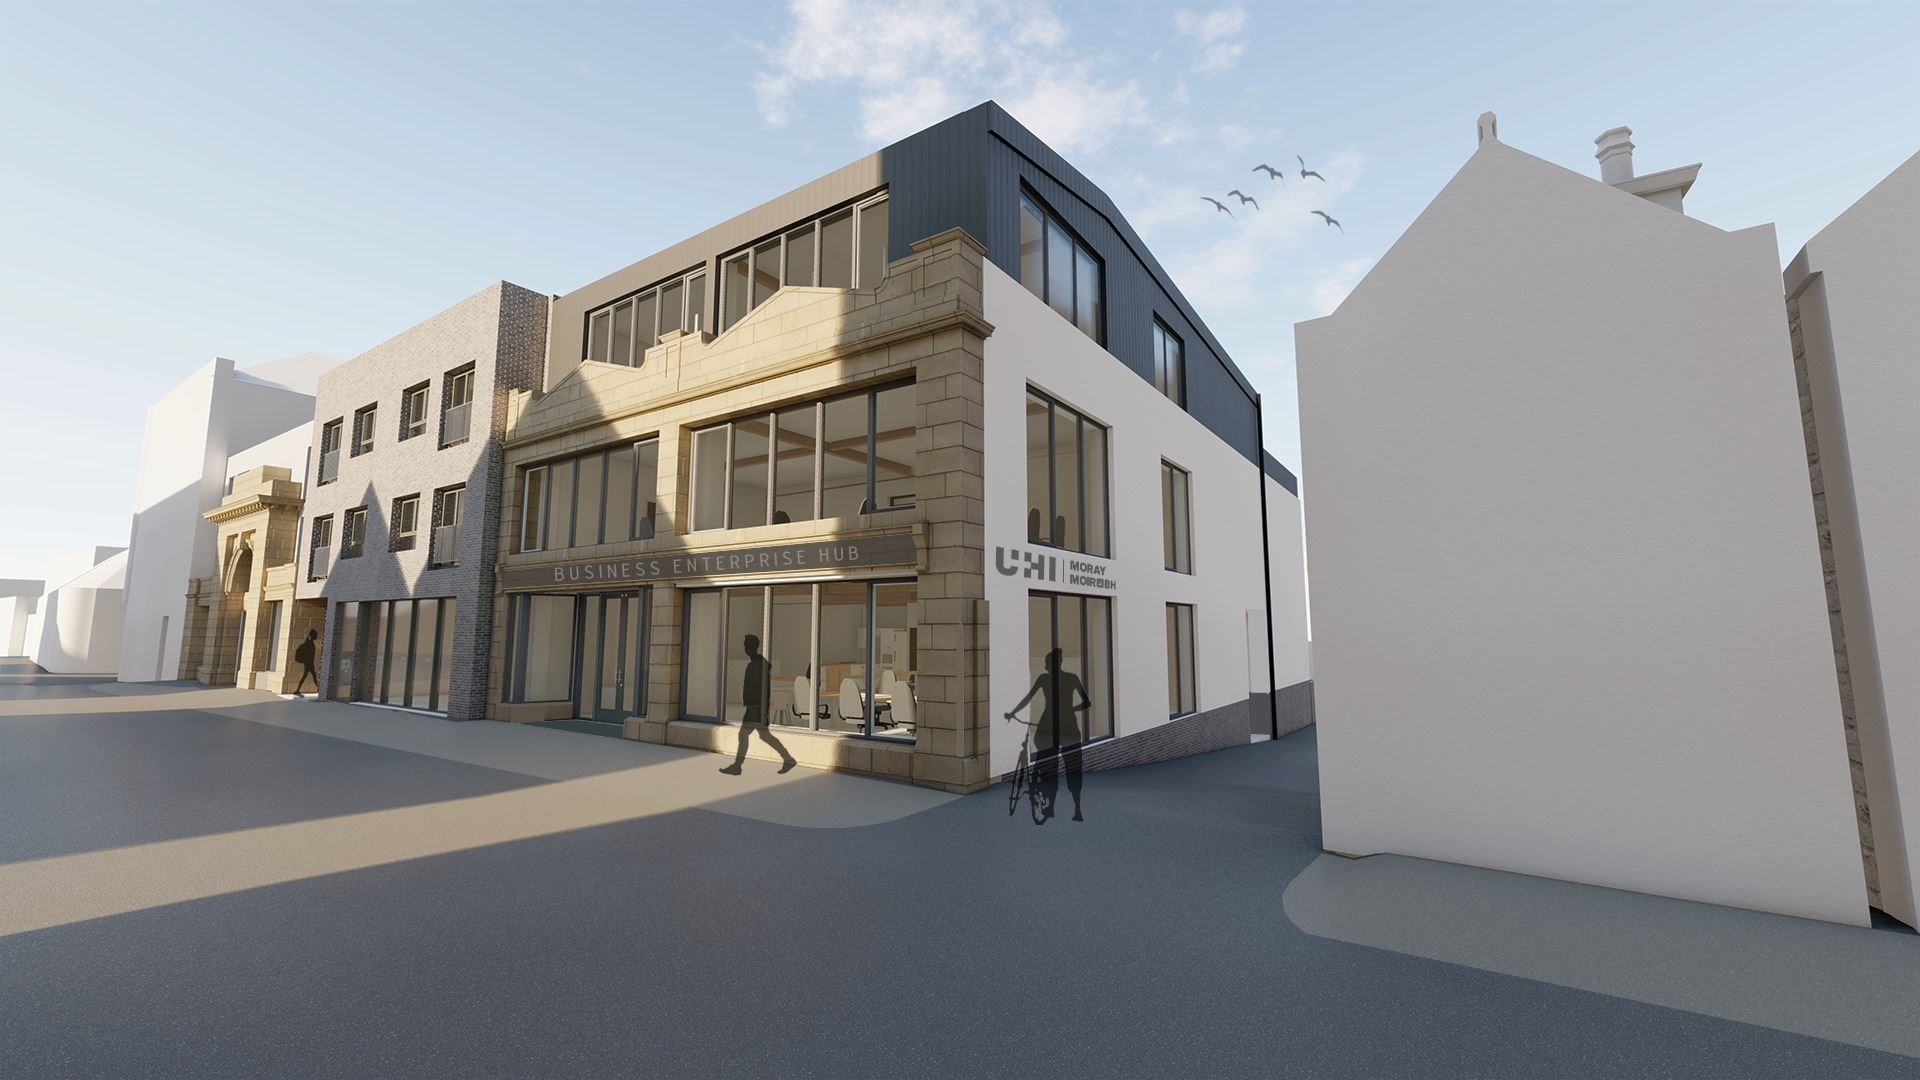 The plans would see derelict and disused buildings in the centre of Elgin transformed.